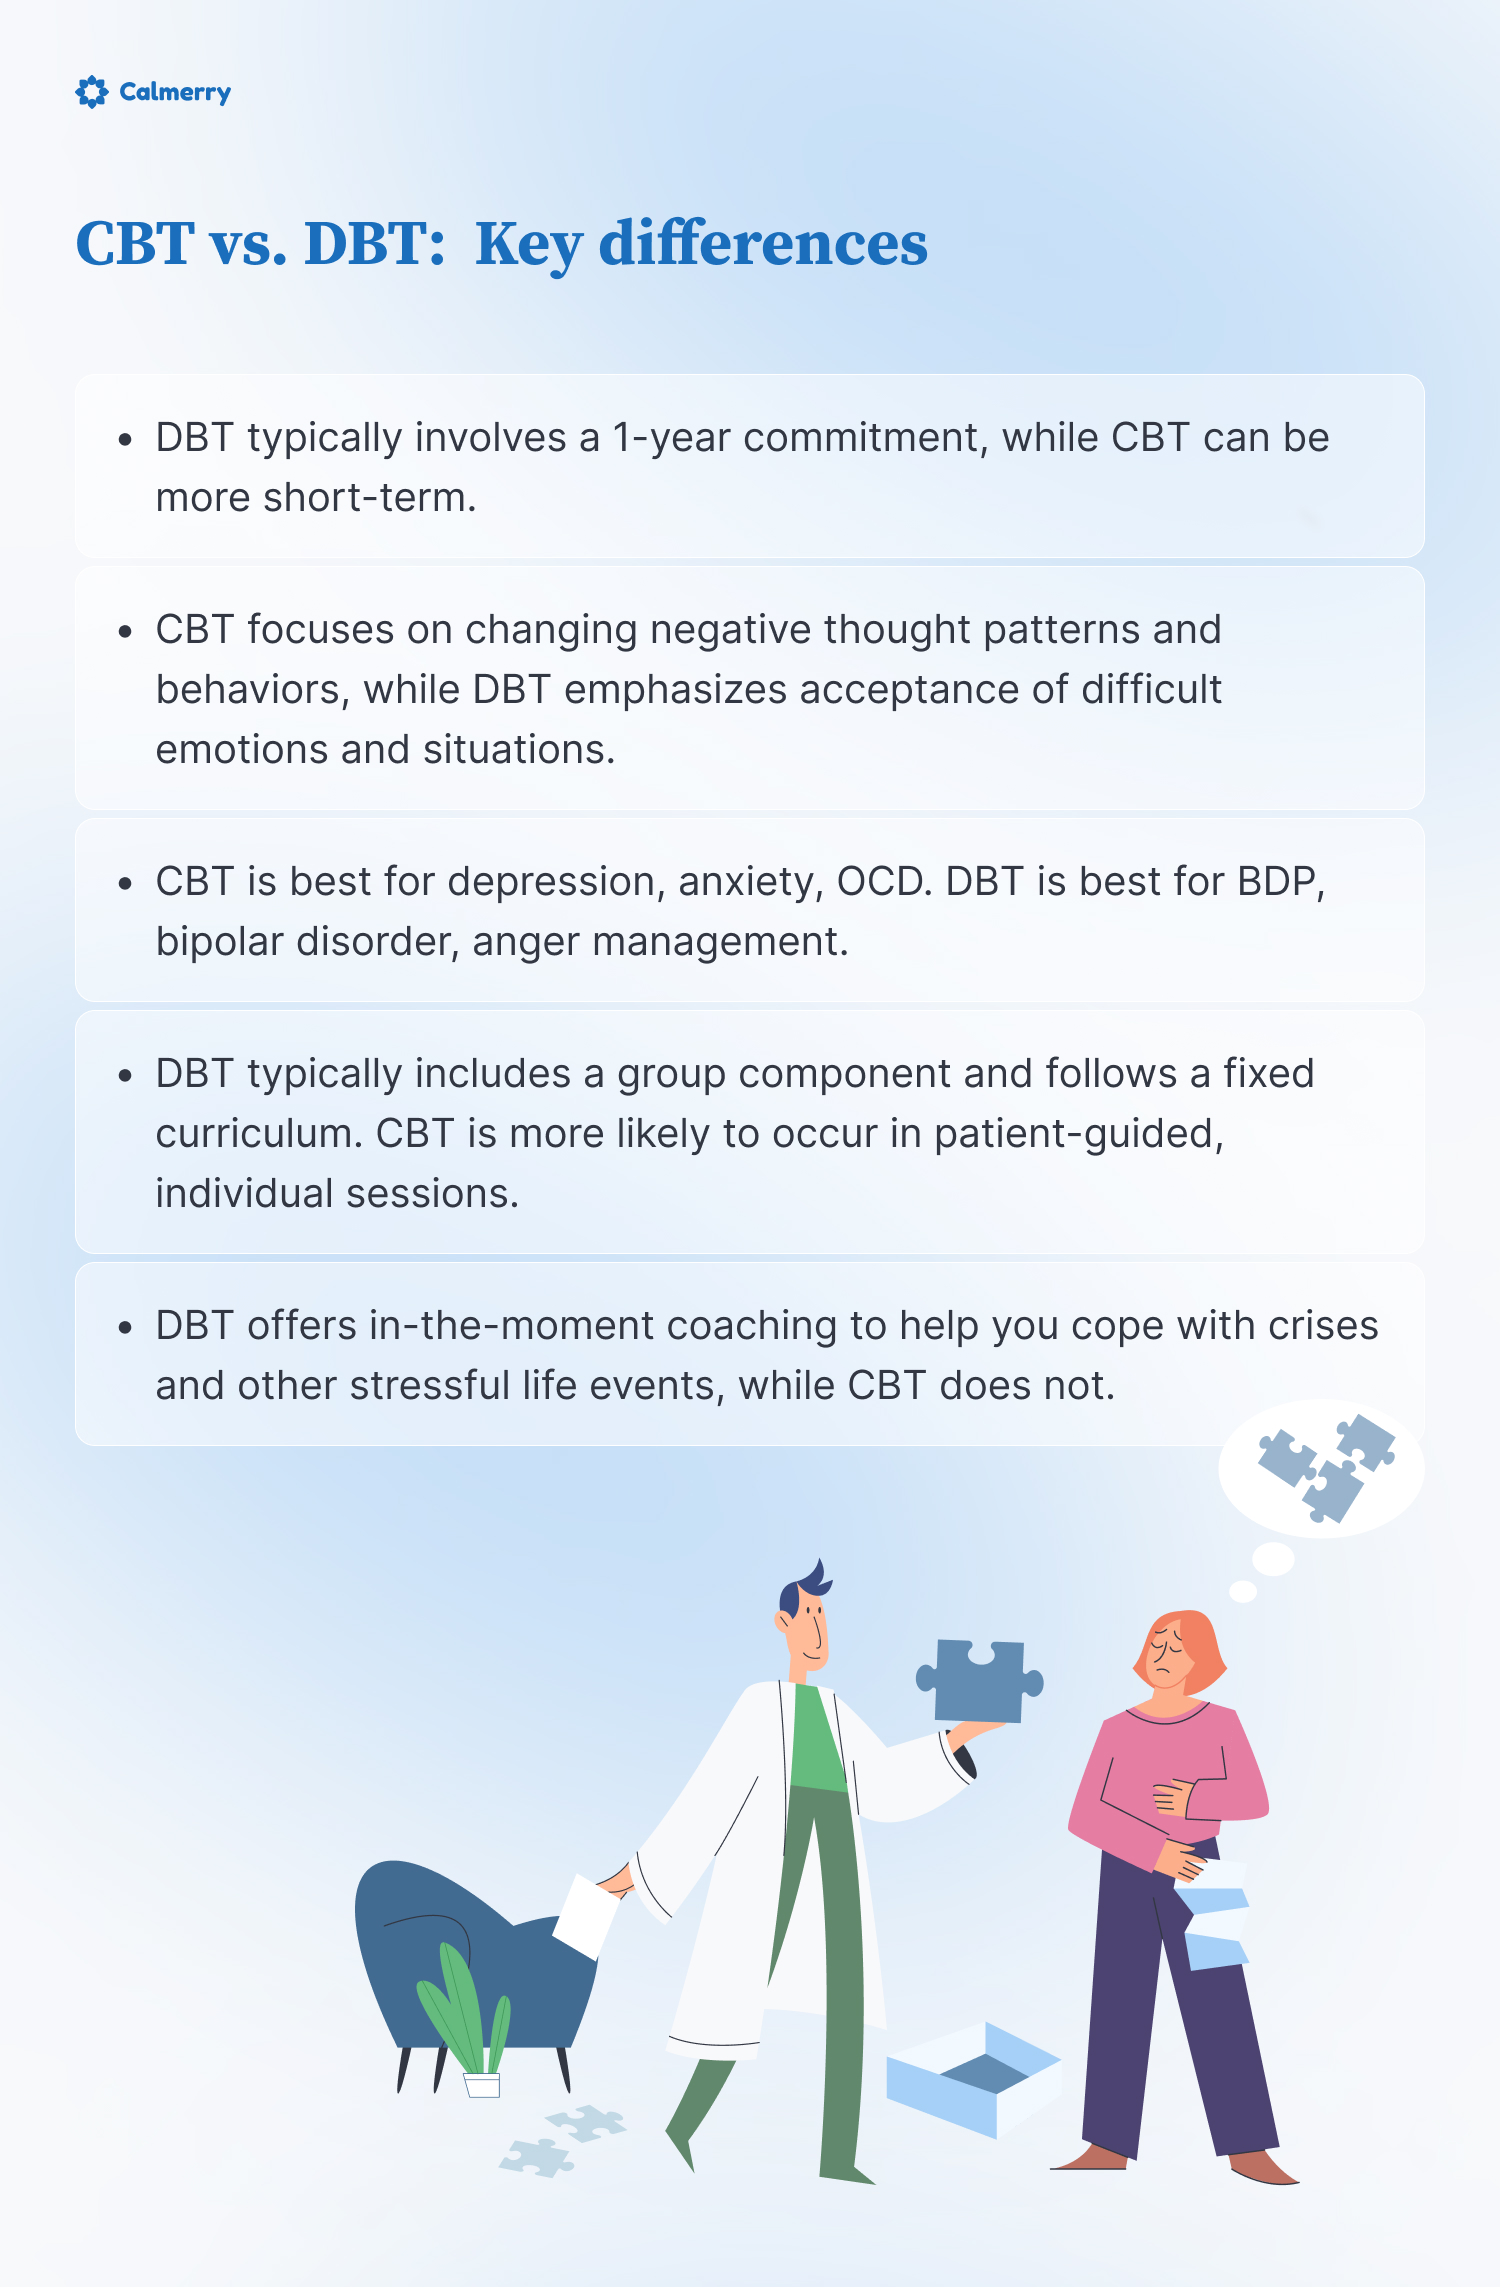 CBT vs. DBT: Key differences

DBT typically involves a 1-year commitment, while CBT can be more short-term.
CBT focuses on changing negative thought patterns and behaviors, while DBT emphasizes acceptance of difficult emotions and situations.
CBT is best for depression, anxiety, OCD. DBT is best for BDP, bipolar disorder, anger management.
DBT typically includes a group component and follows a fixed curriculum. CBT is more likely to occur in patient-guided, individual sessions.
DBT offers in-the-moment coaching to help you cope with crises and other stressful life events, while CBT does not.